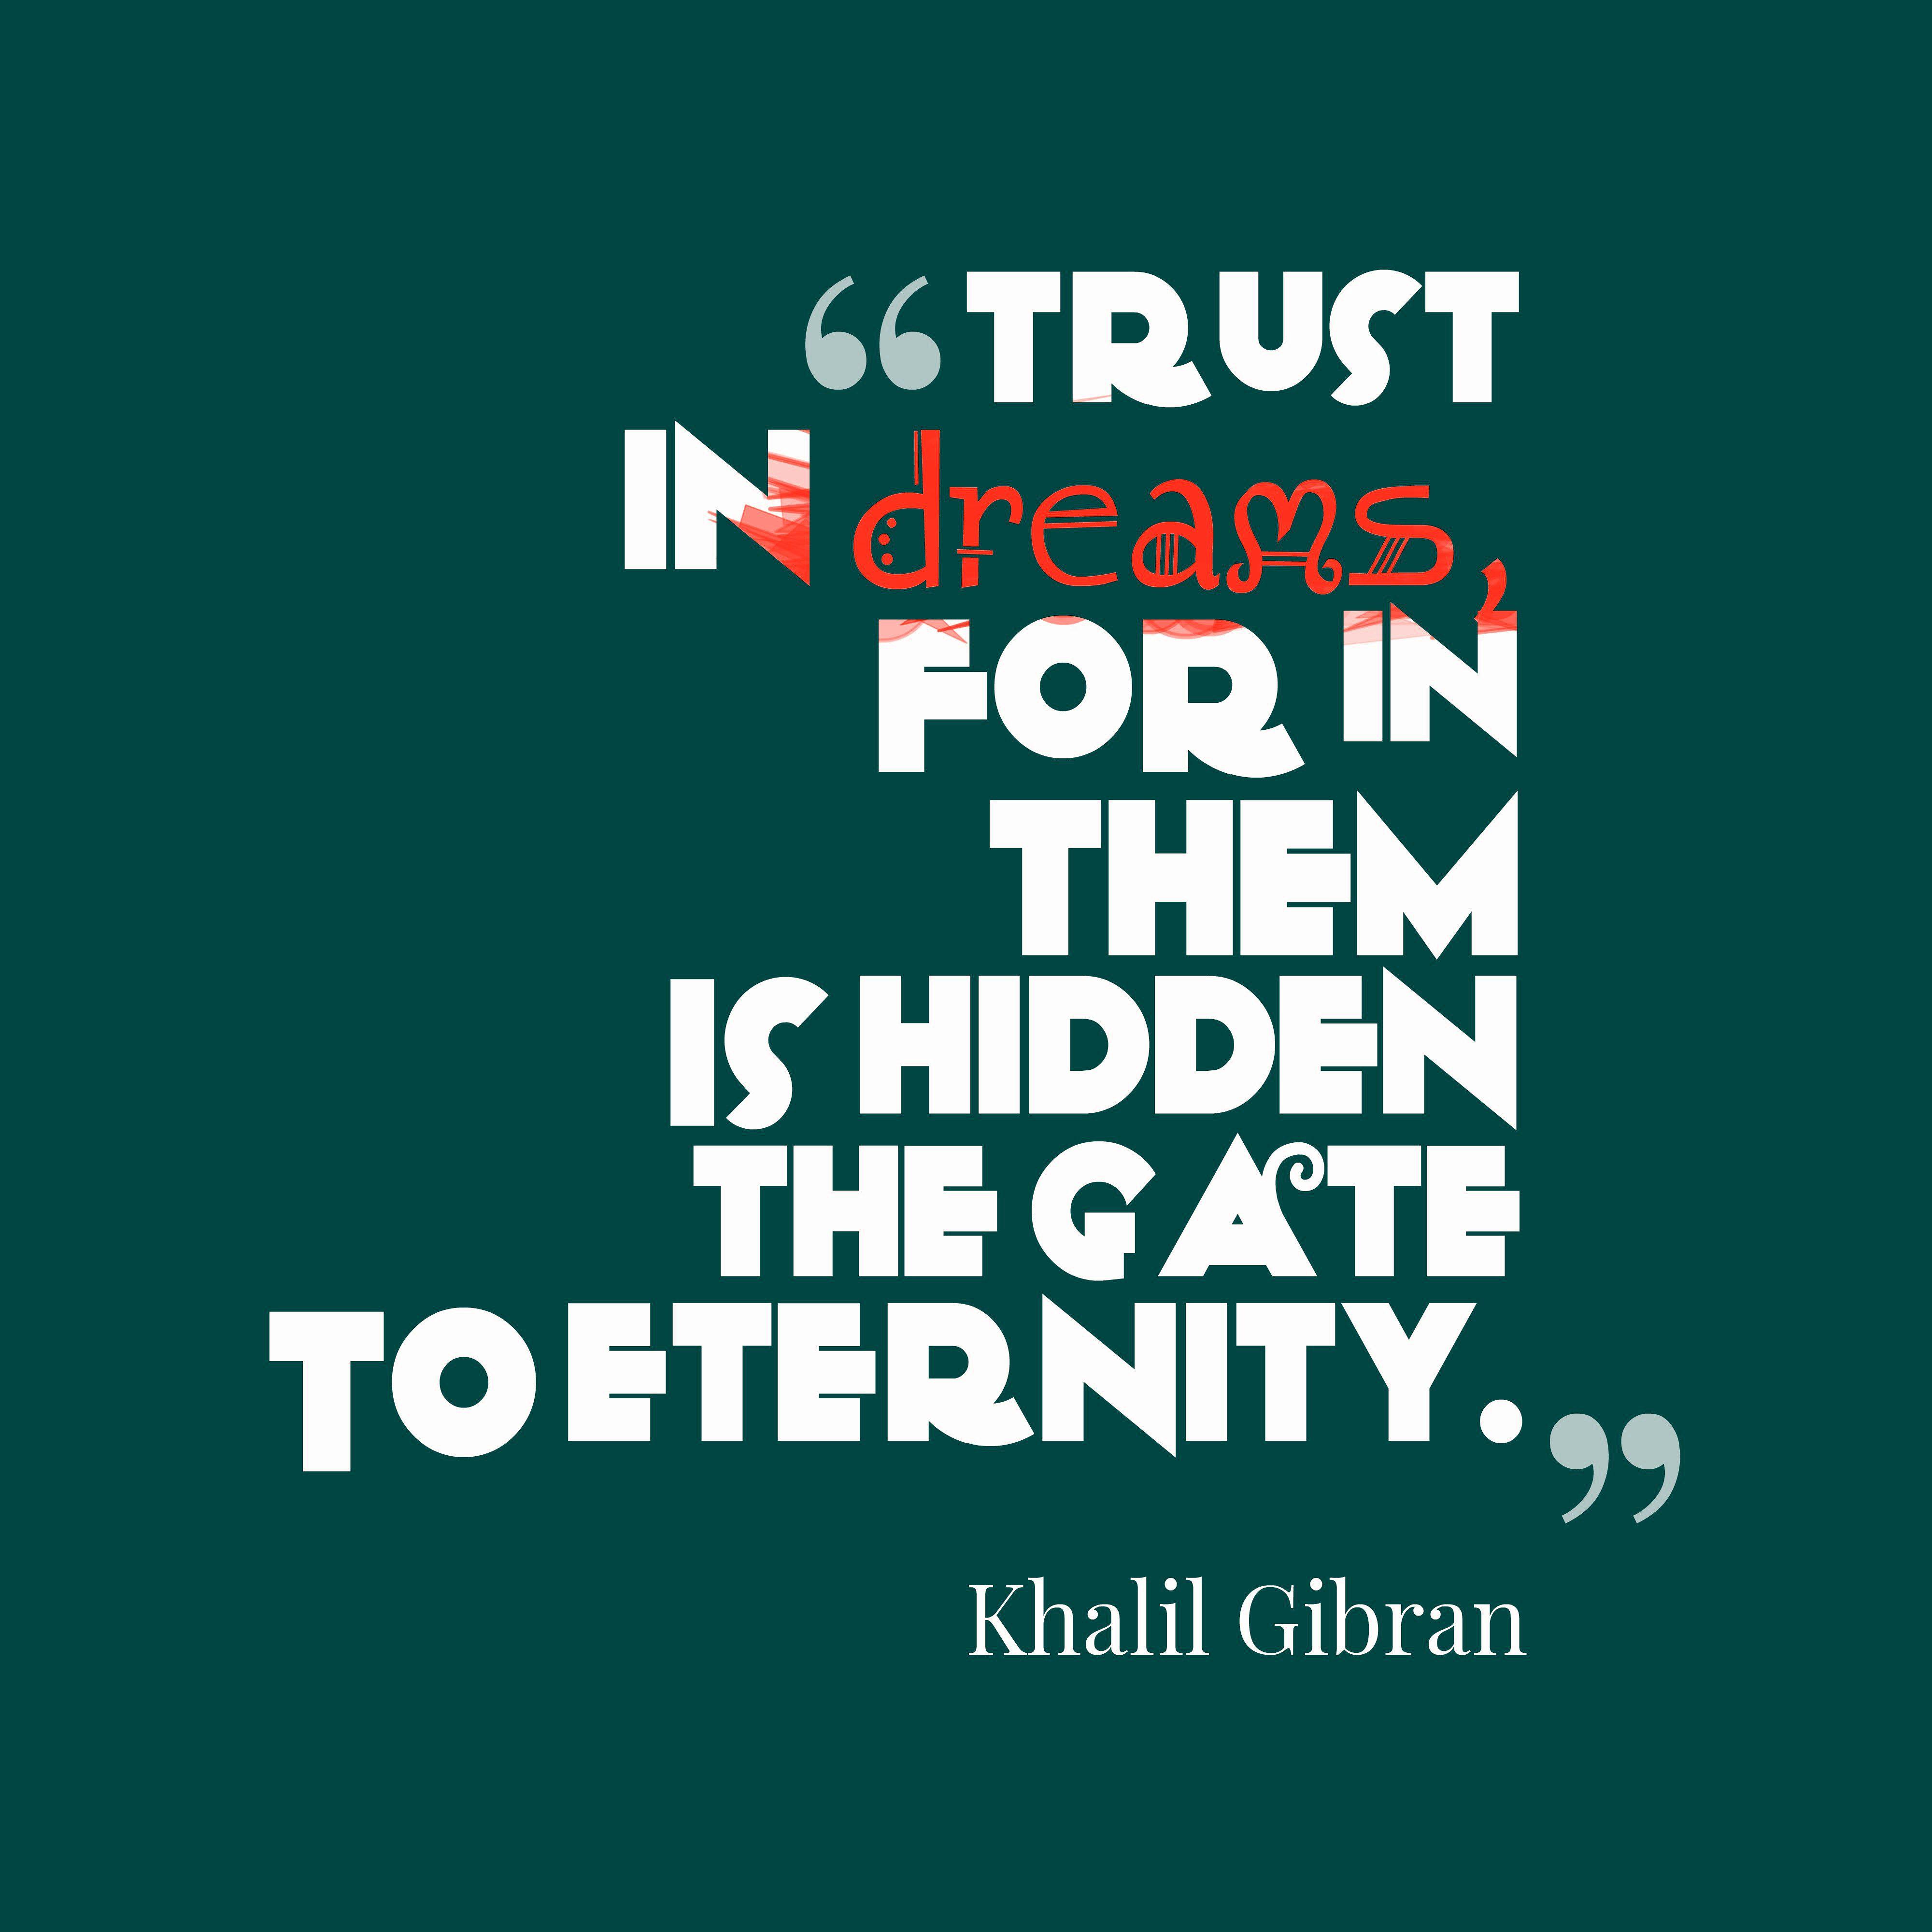 Gibran Motivation Quotes in HD Wallpaper for whatsapp